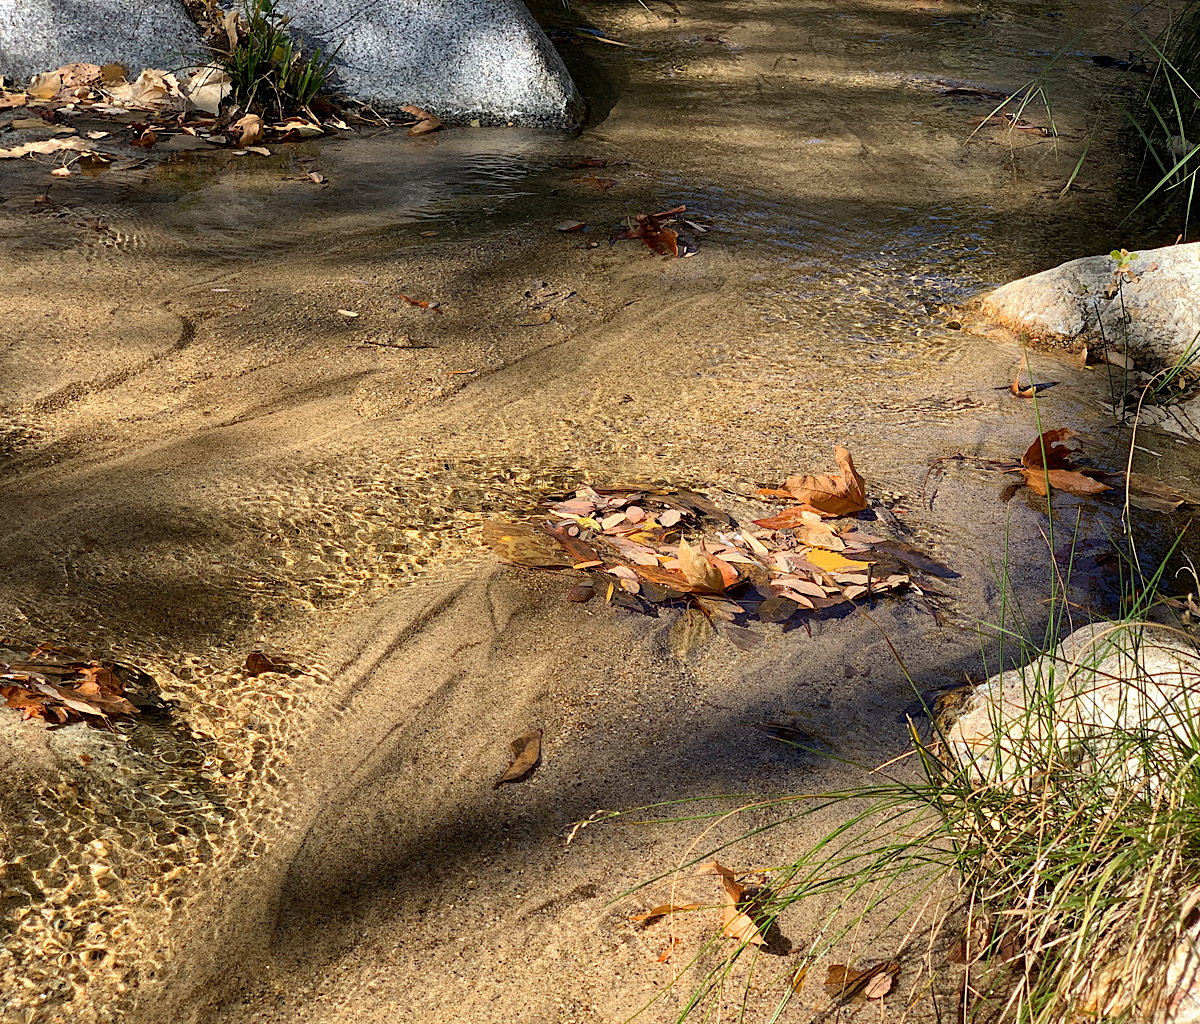 Oak leaves catch in the sand at our one water source of the day. 